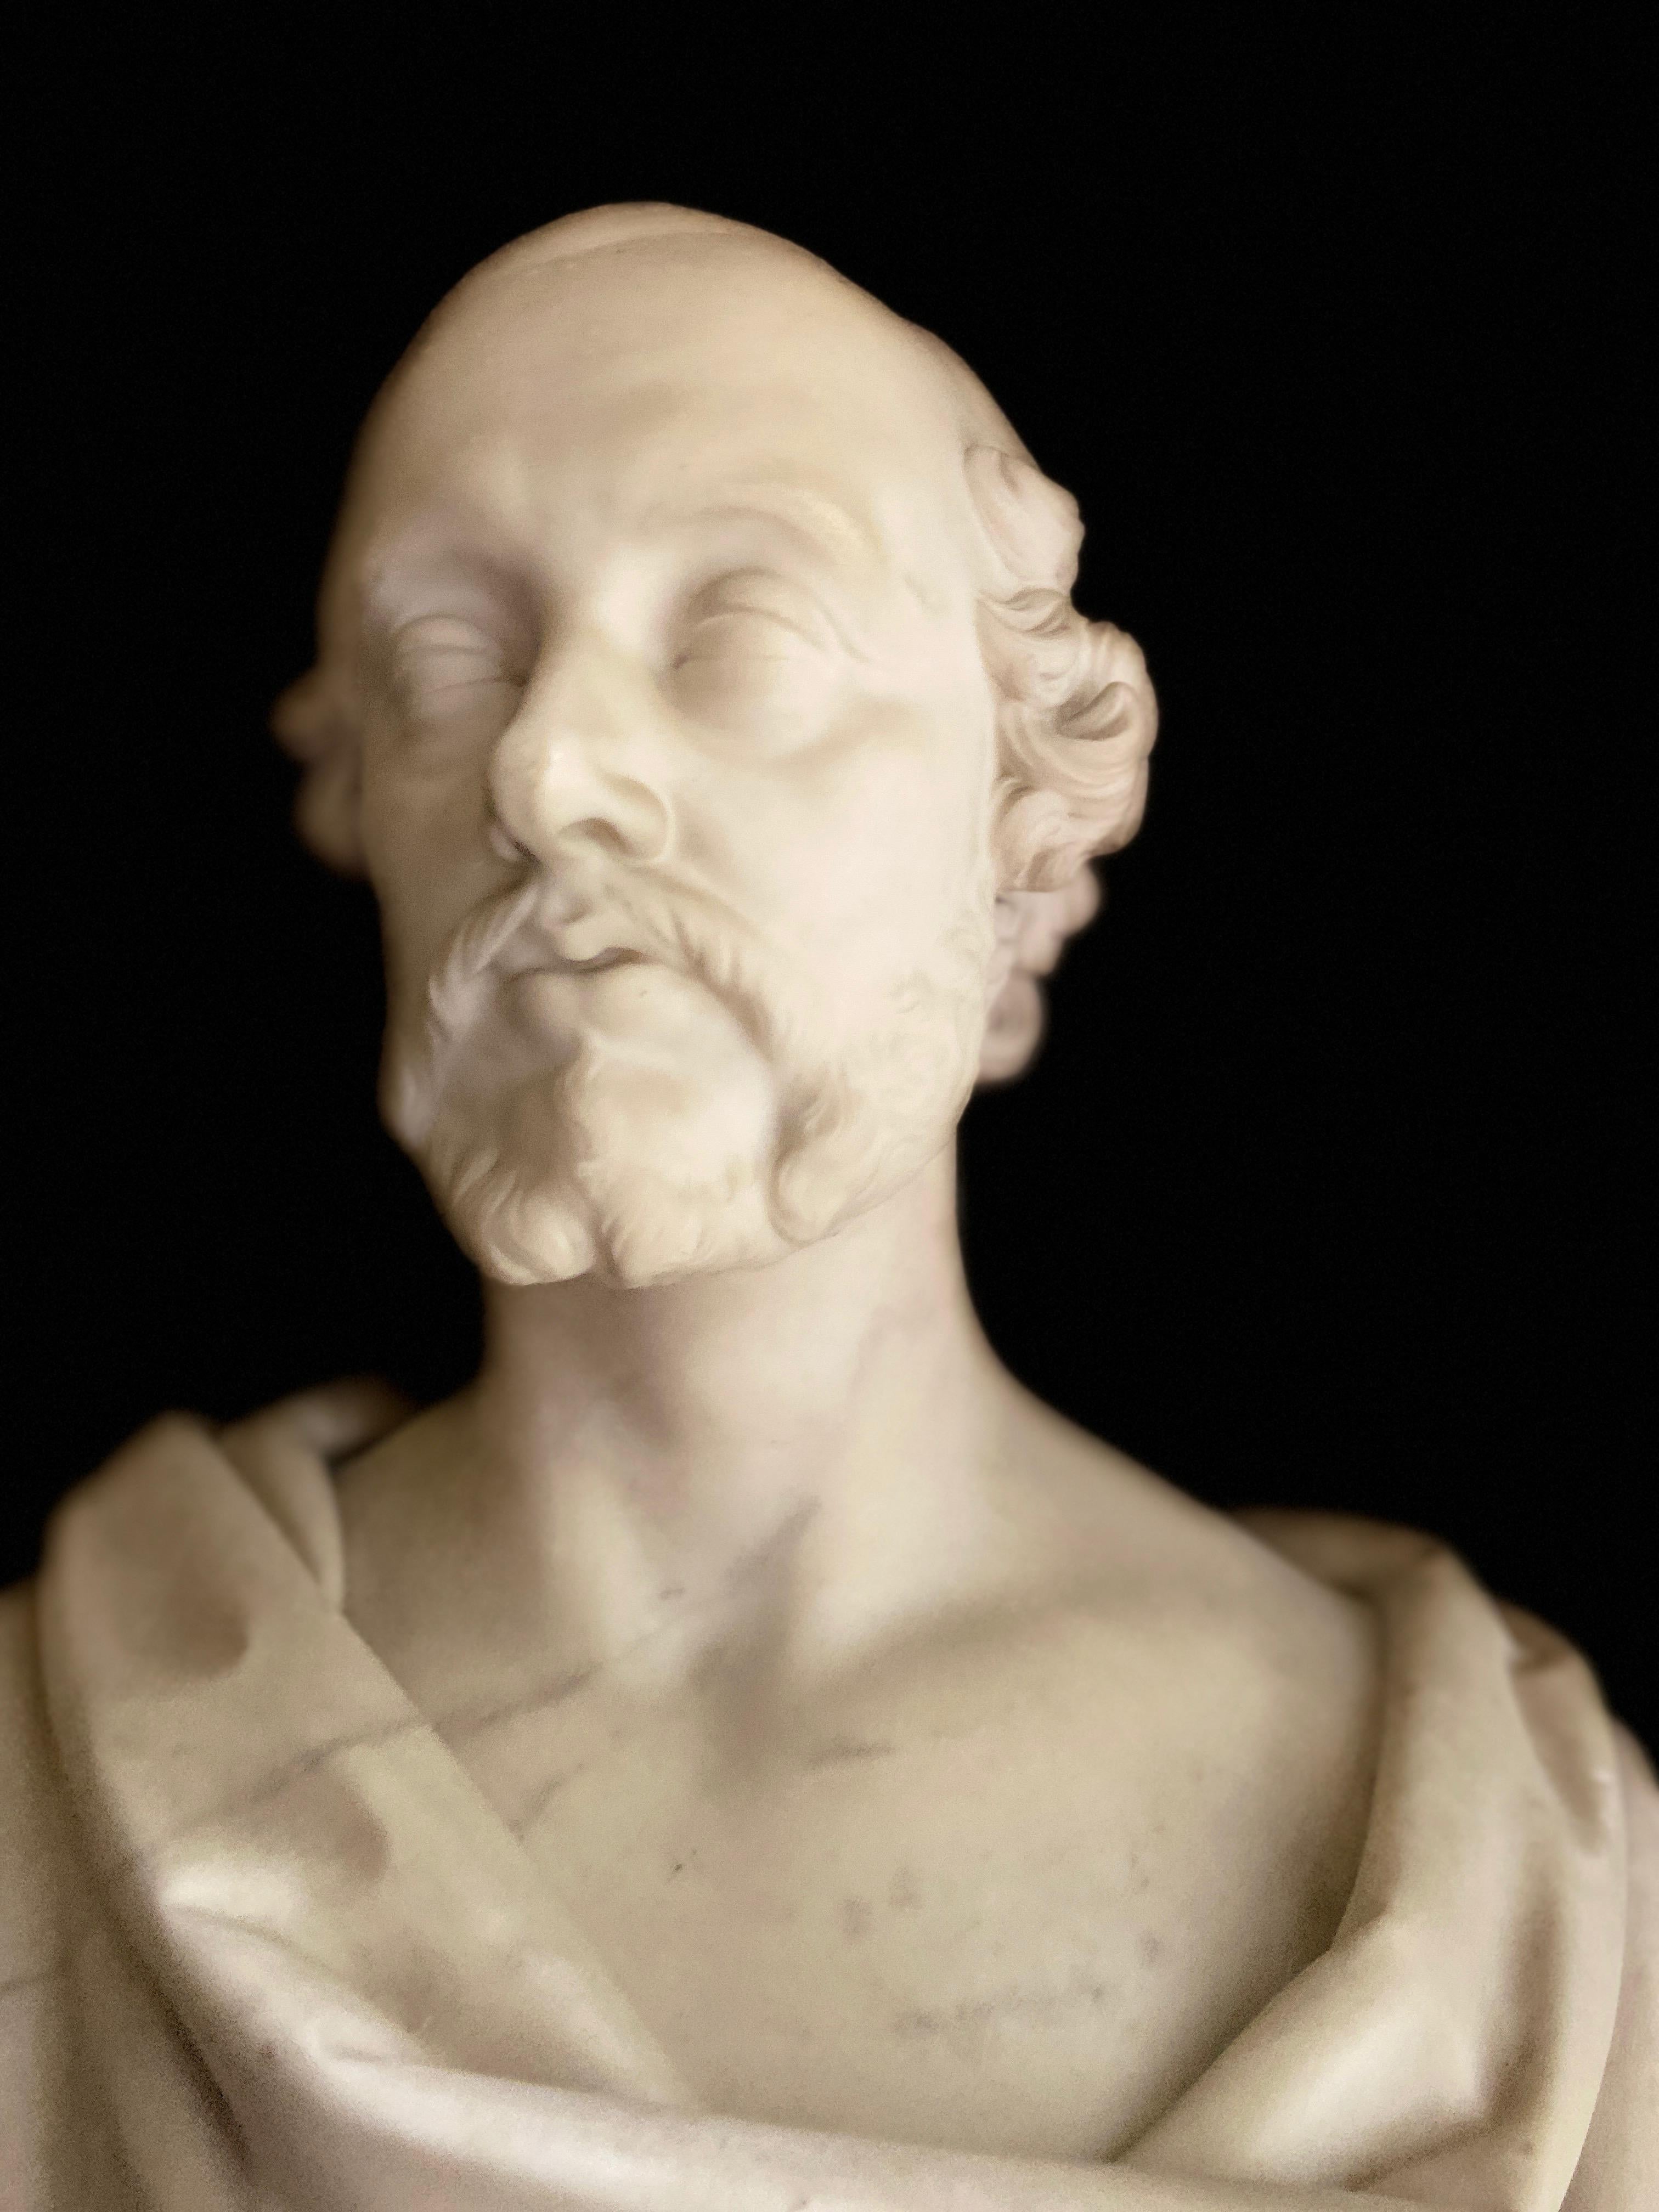 Bust of a statesman in white marble - dated 1852 - signed Christopher Moore.

Christopher Moore (1790-1863) was an Irish-born sculptor operational mainly in England in the 19th century.

He was born in Dublin in 1790. In 1819 he is listed as